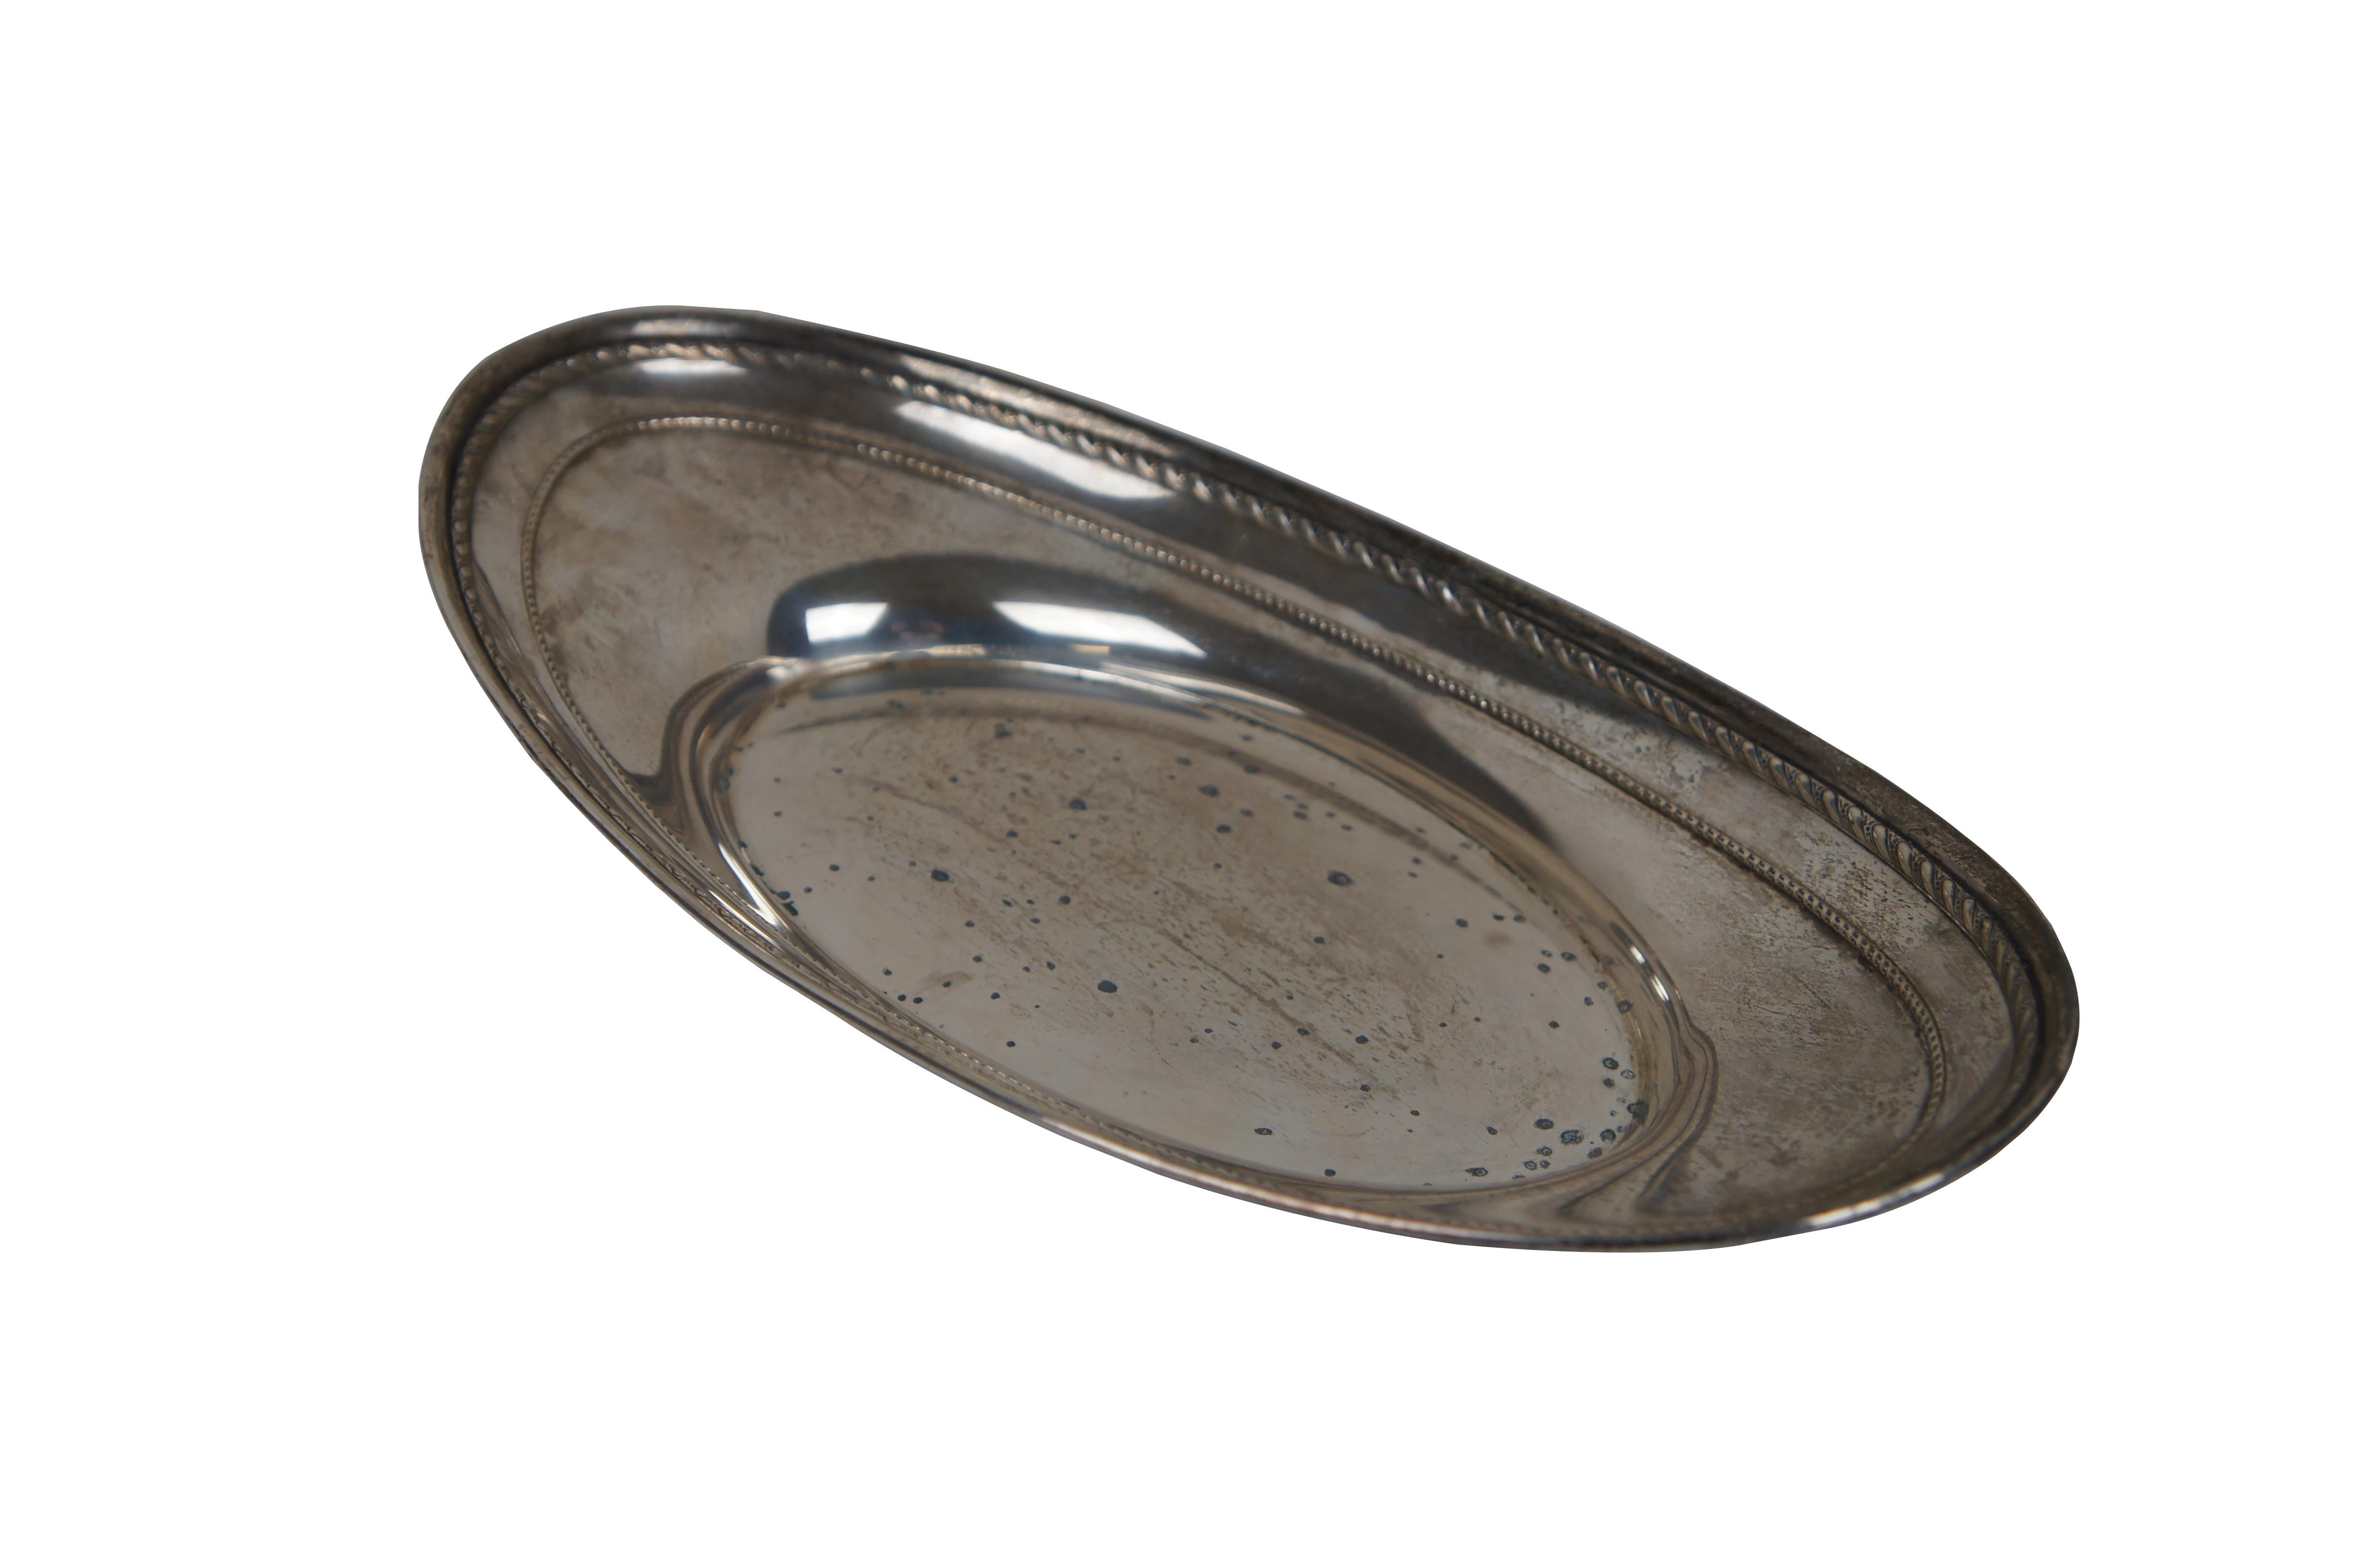 Vintage Alvin sterling silver oval bread tray, number J1011, featuring an oval boat shape with rope twist details.

